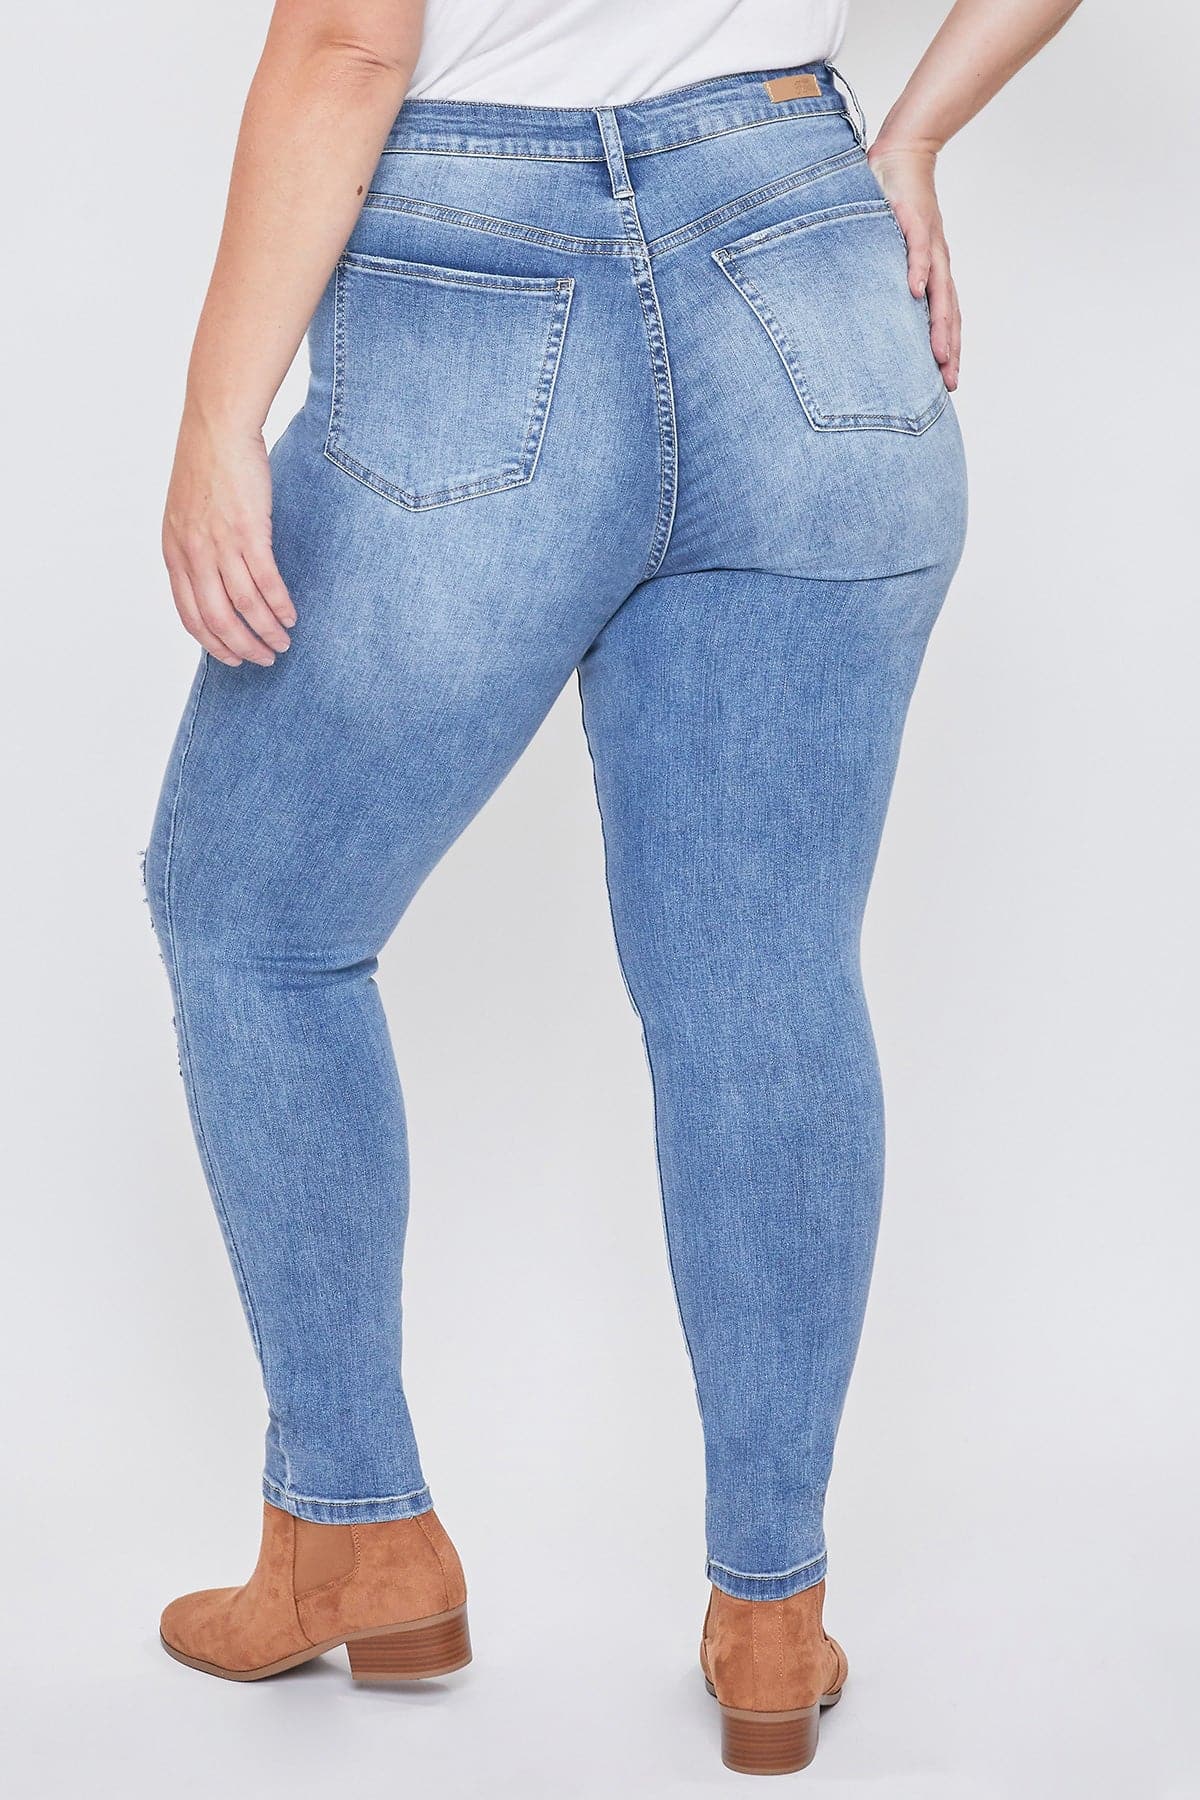 Women's Plus Size Essential High Rise Skinny Jeans from ROYALTY